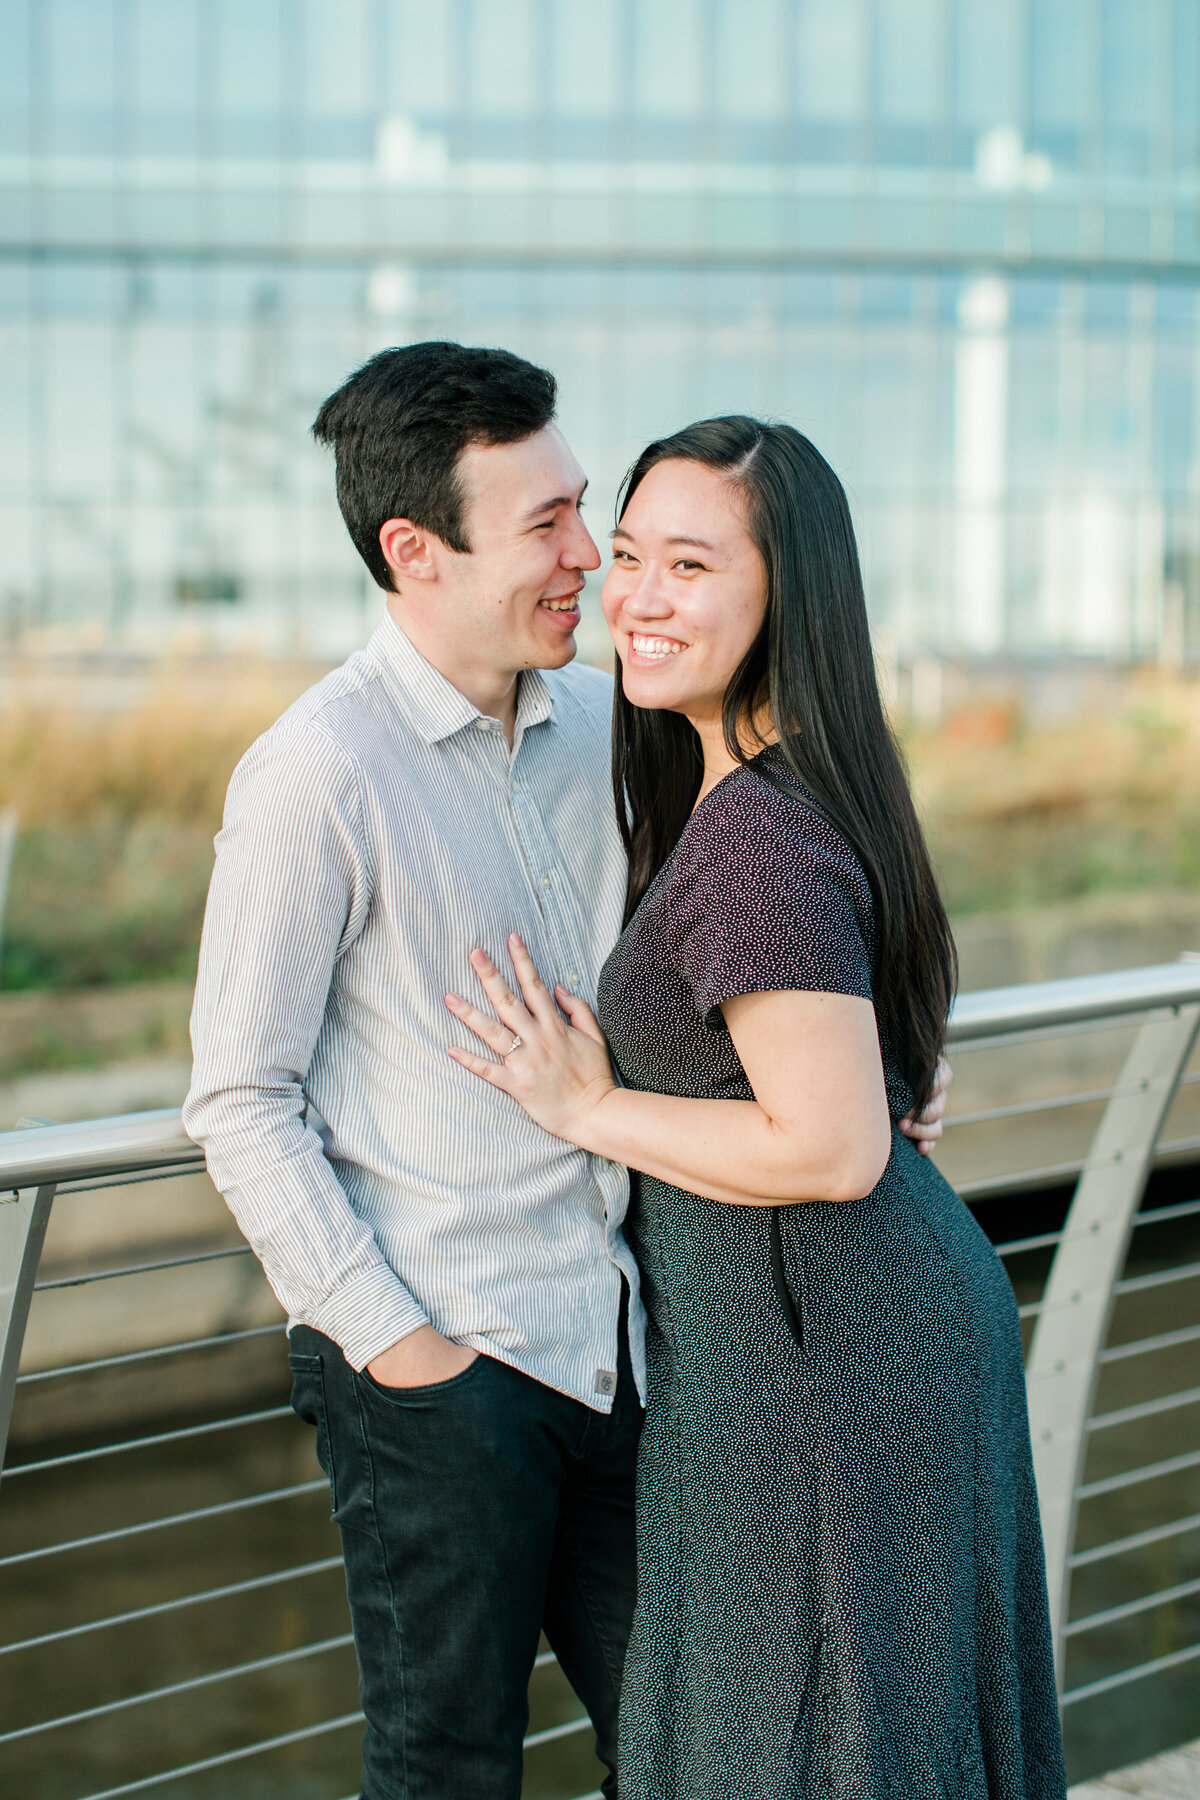 Becky_Collin_Navy_Yards_Park_The_Wharf_Washington_DC_Fall_Engagement_Session_AngelikaJohnsPhotography-7736